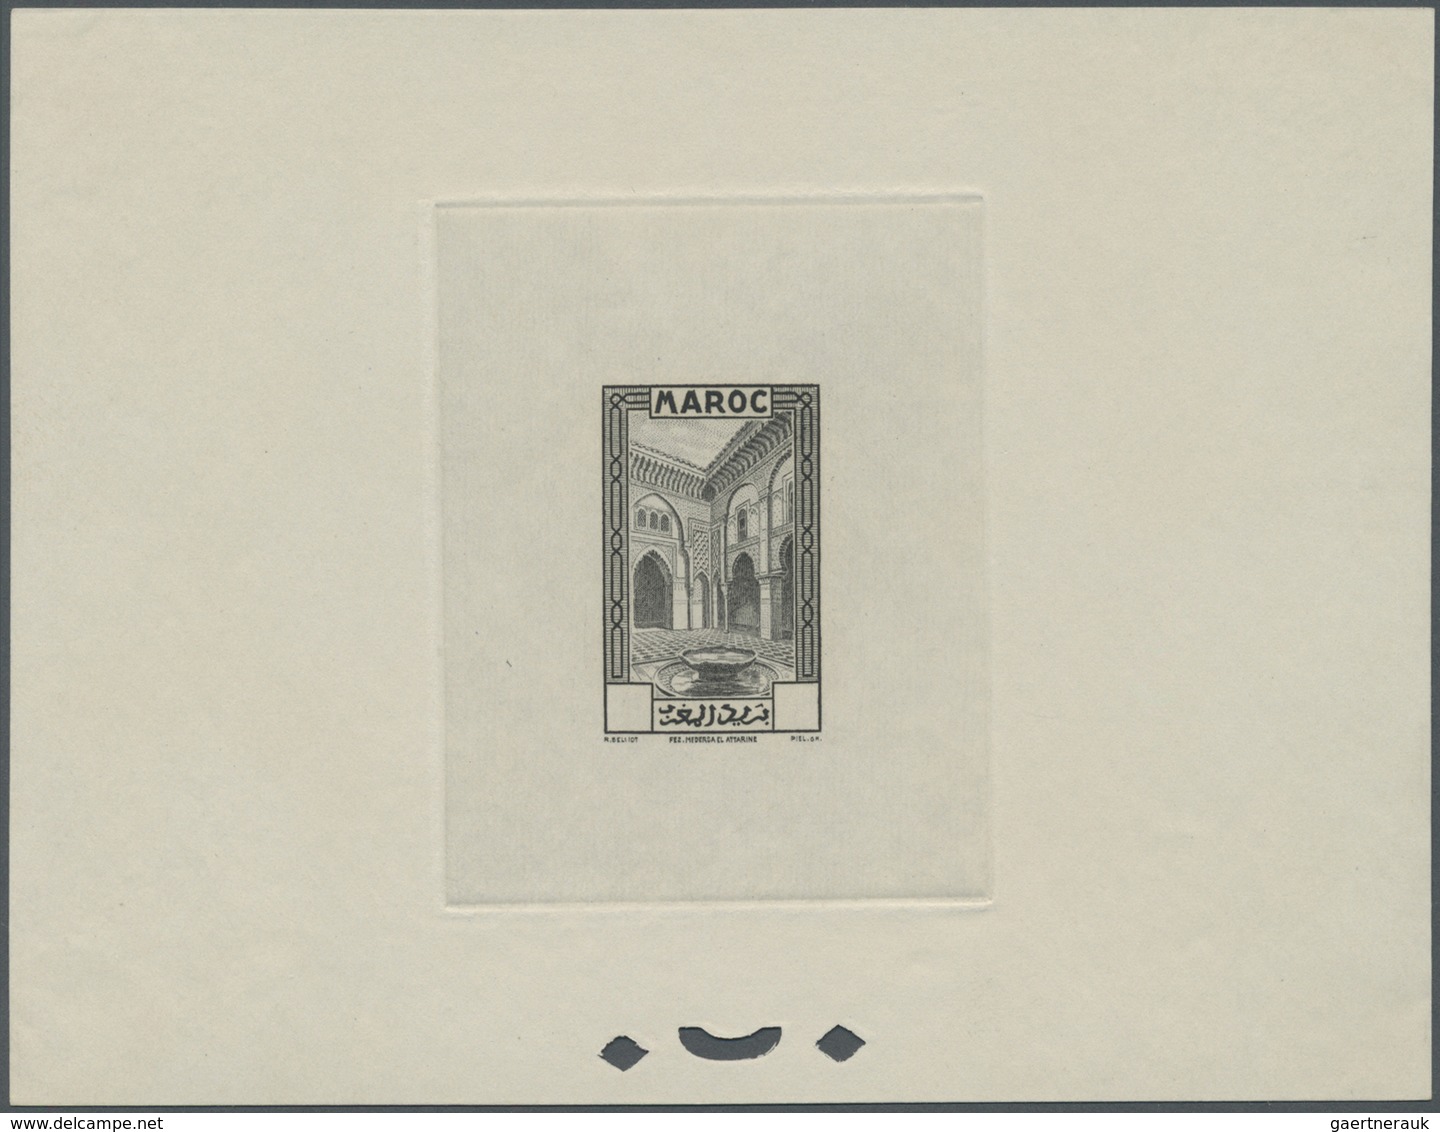 (*) Marokko: 1933, Definitives "Views of Morocco", 1c. to 20fr., complete set of 24 values, epreuve with